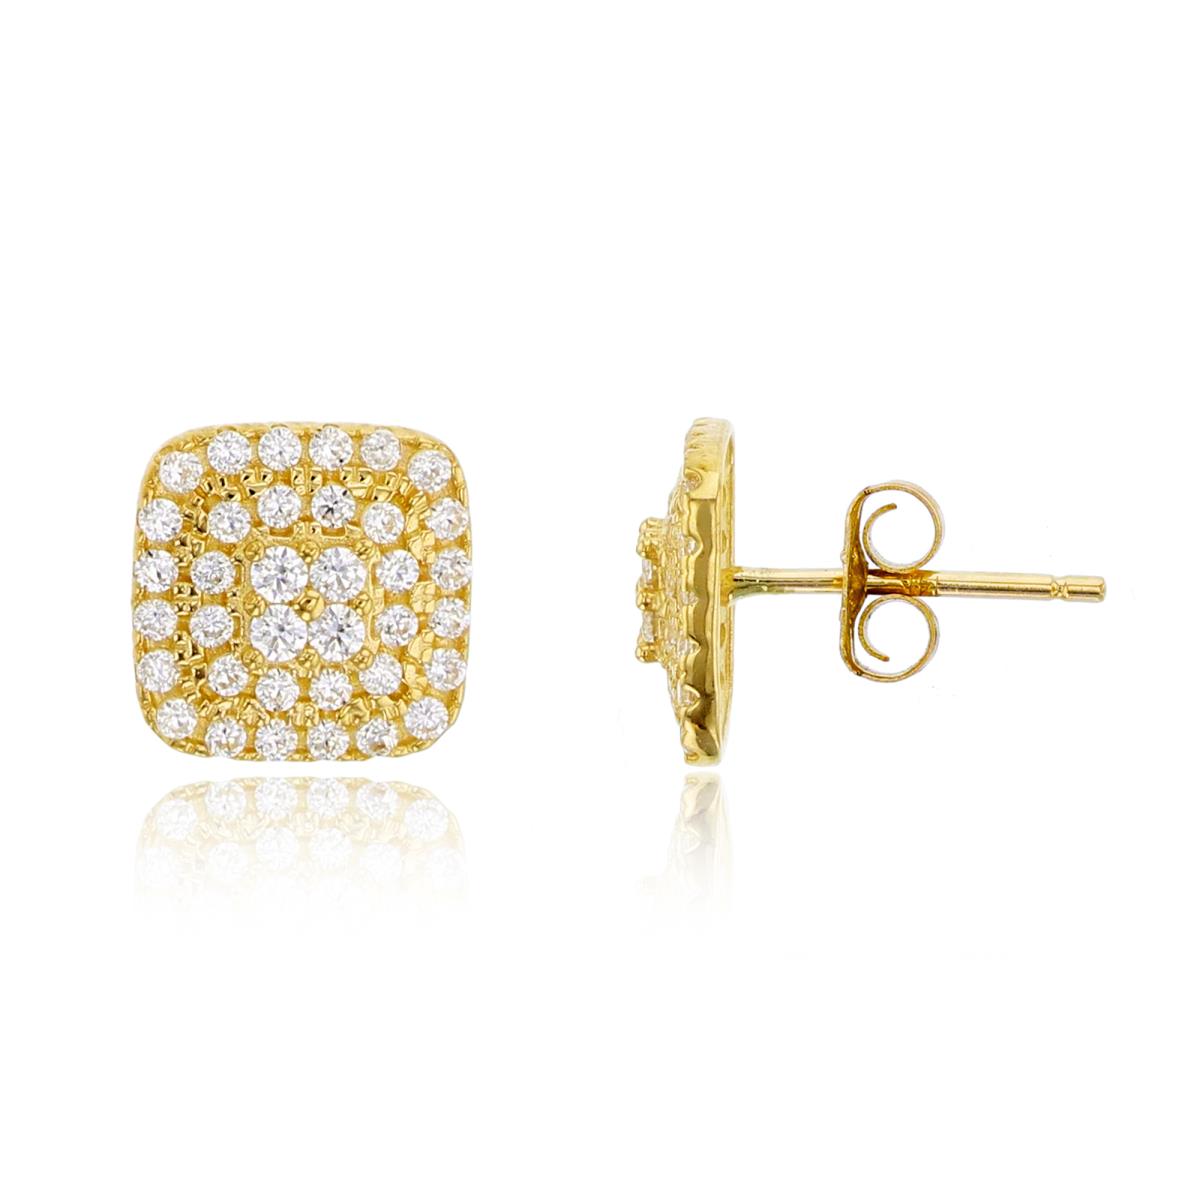 14K Yellow Gold Rnd CZ Micropave Cushion Studs with 4.5mm Clutch